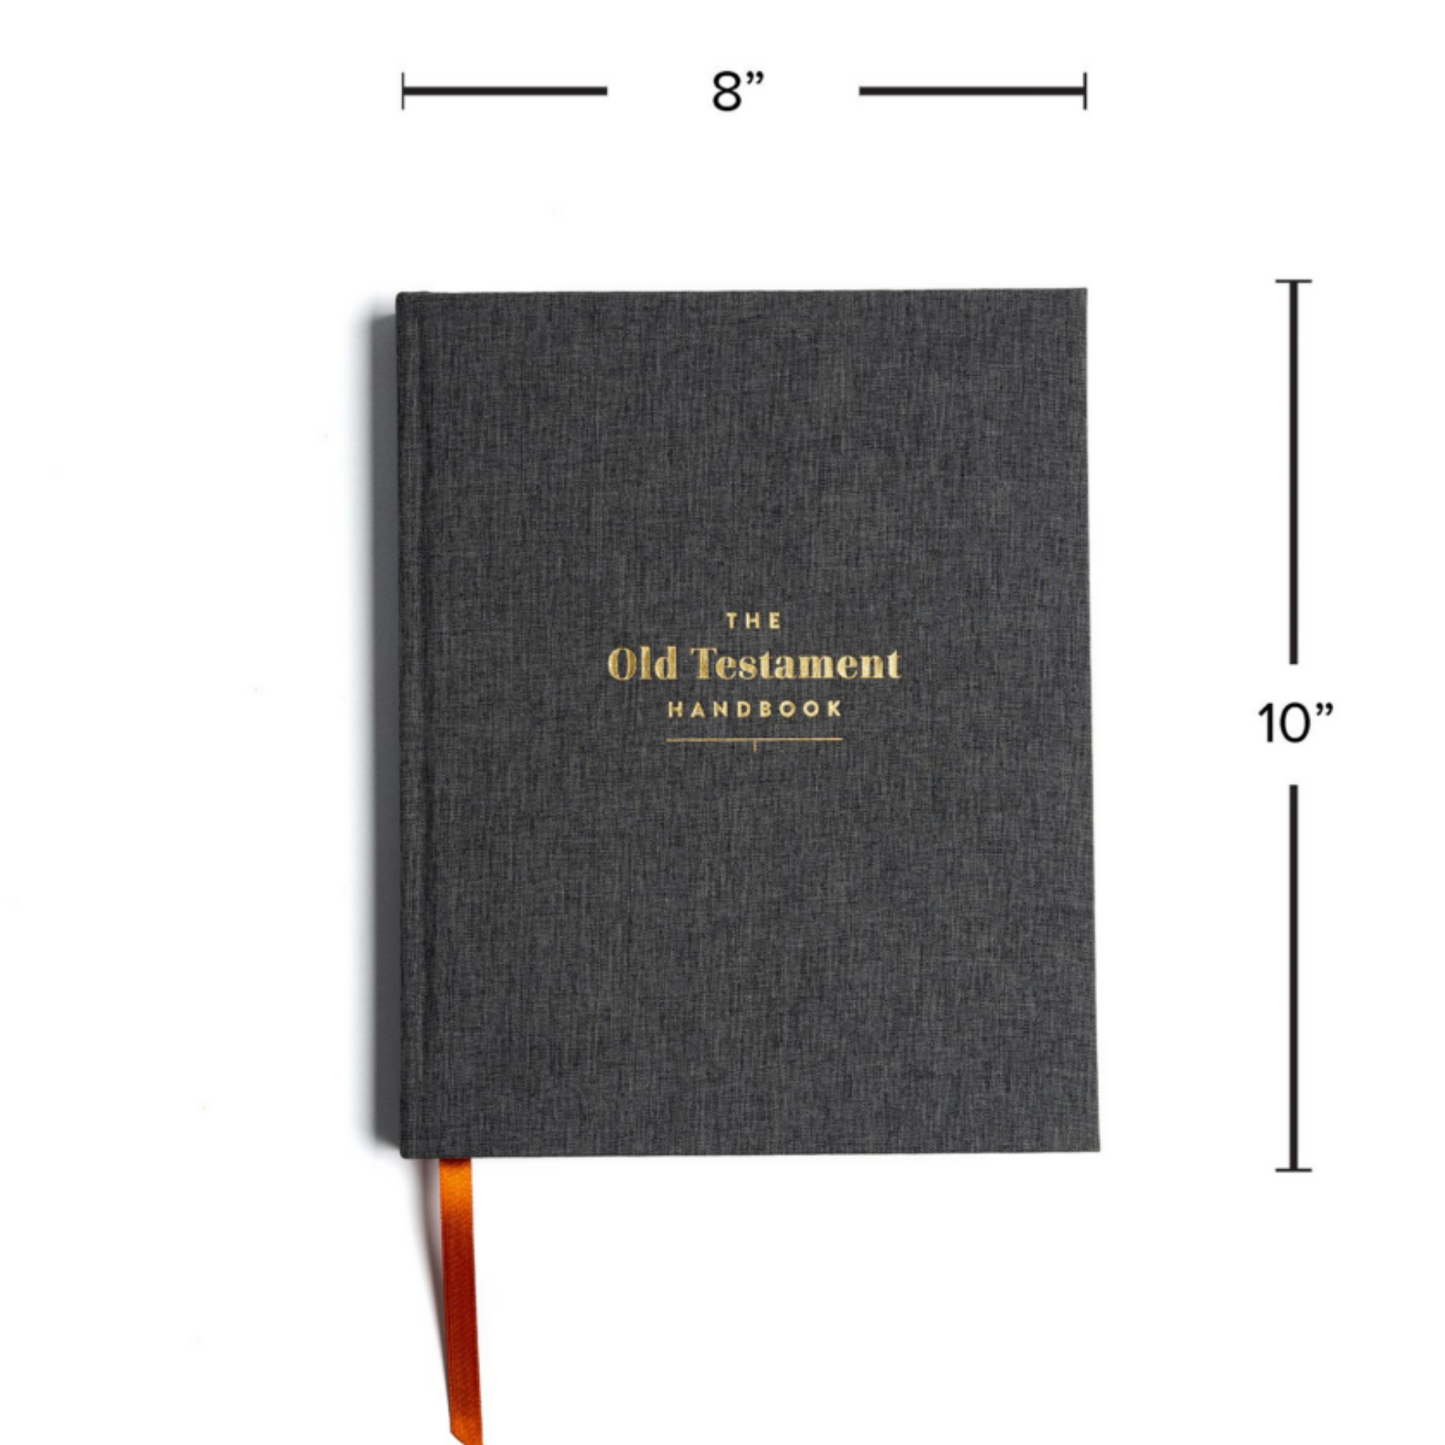 The Old Testament Handbook, Charcoal Cloth-Over-Board